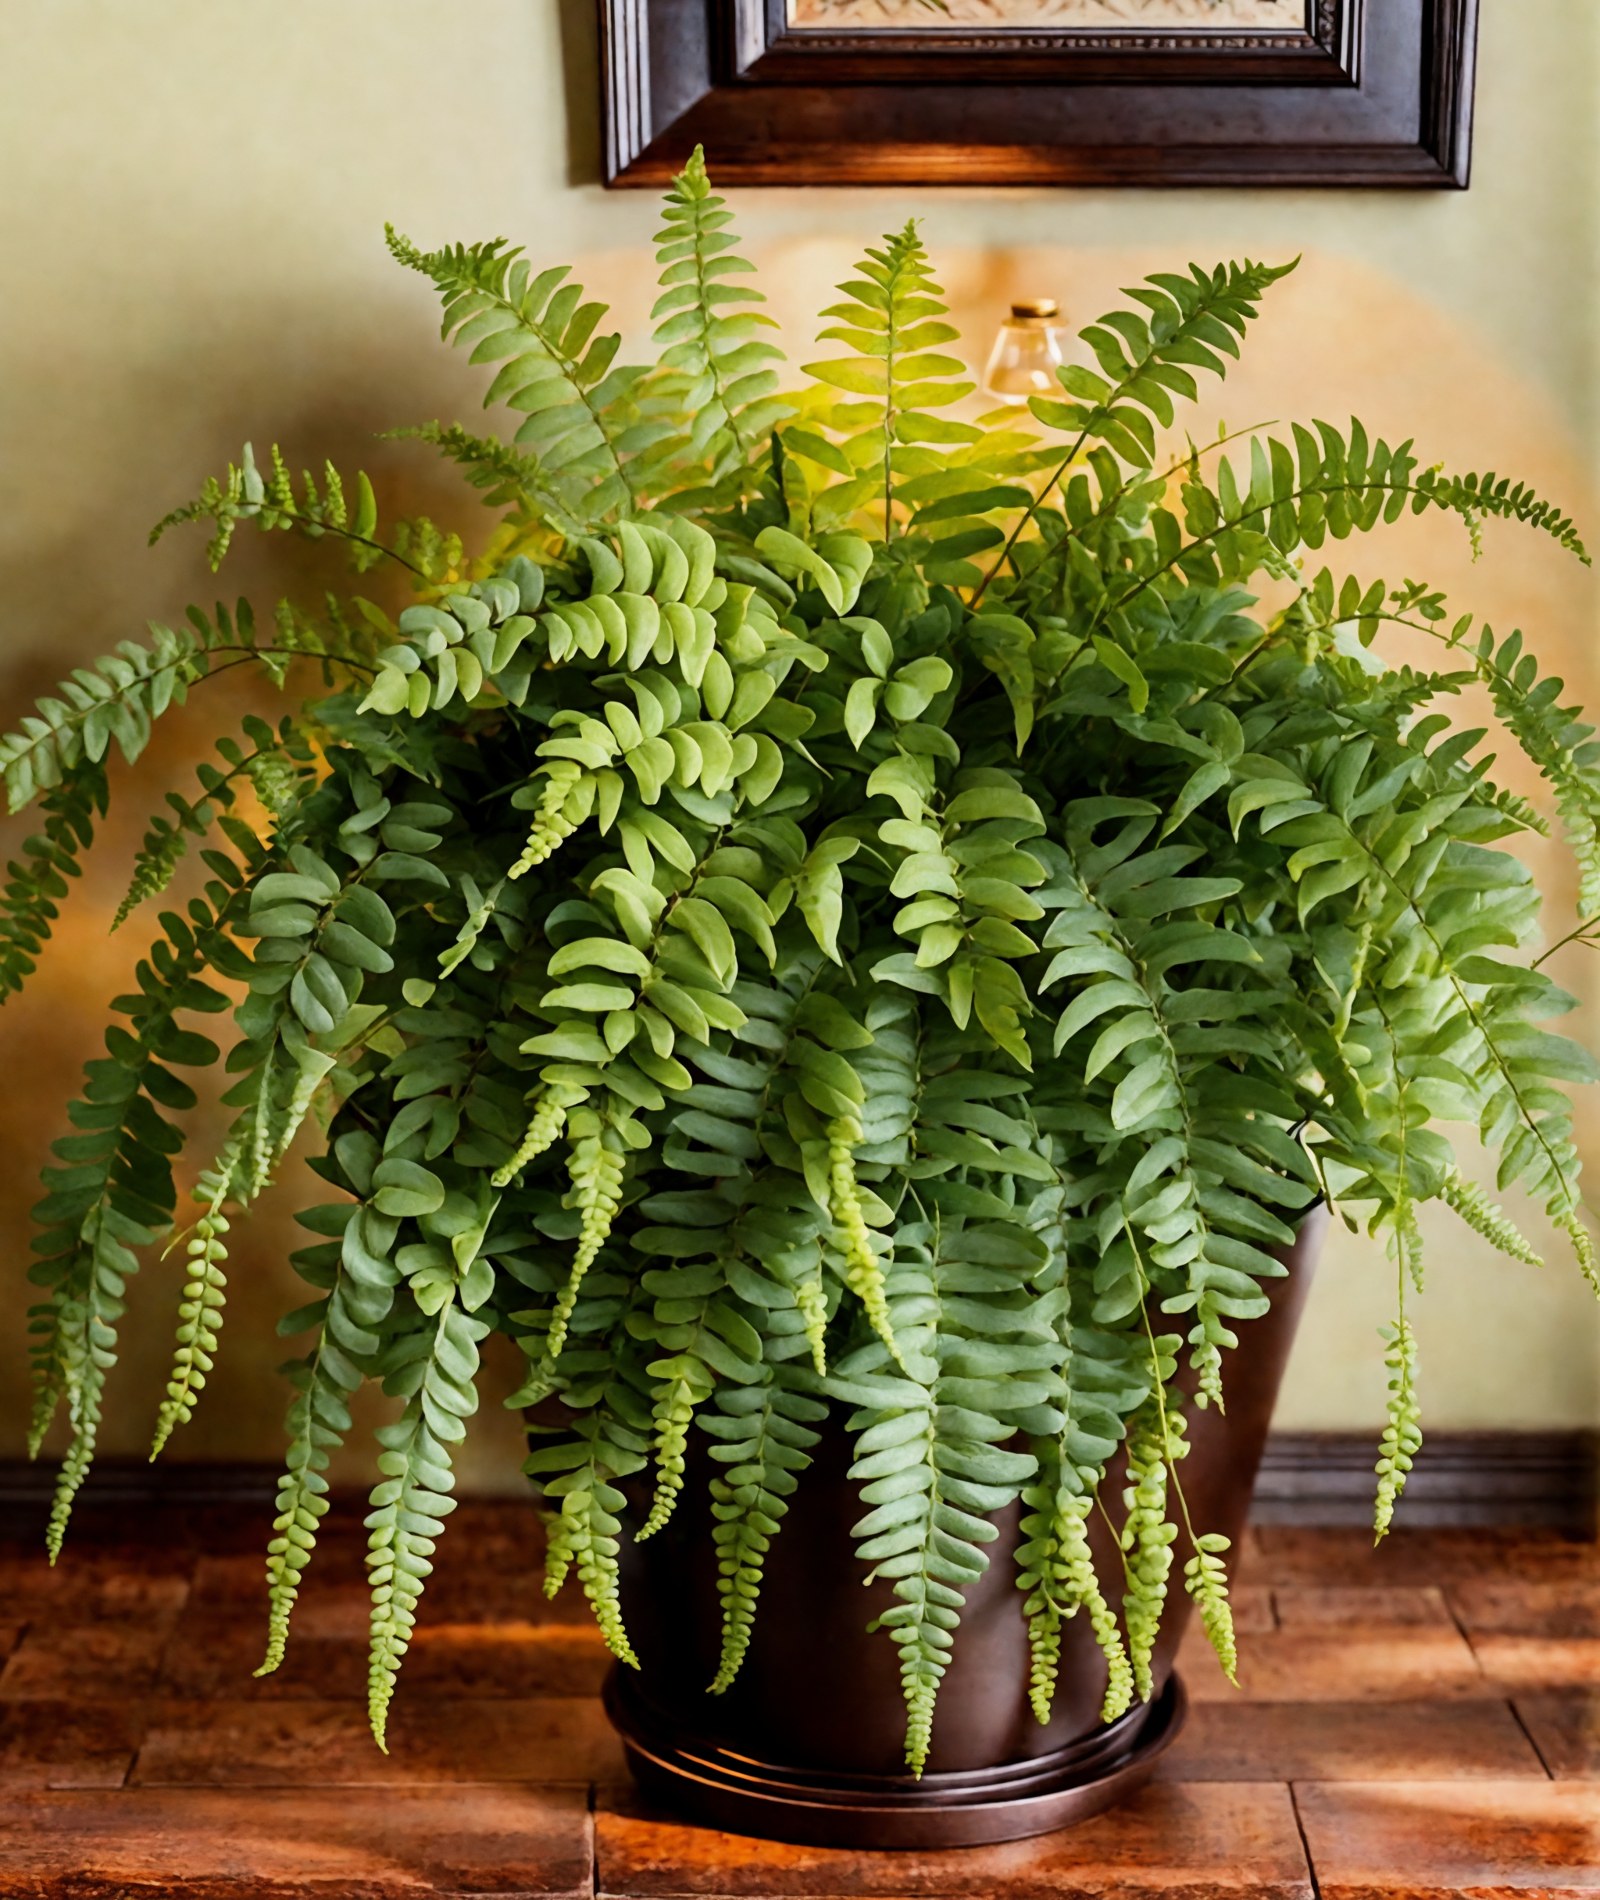 Nephrolepis exaltata (Boston fern) in a black bowl on a wooden floor, with neutral, rustic indoor decor.